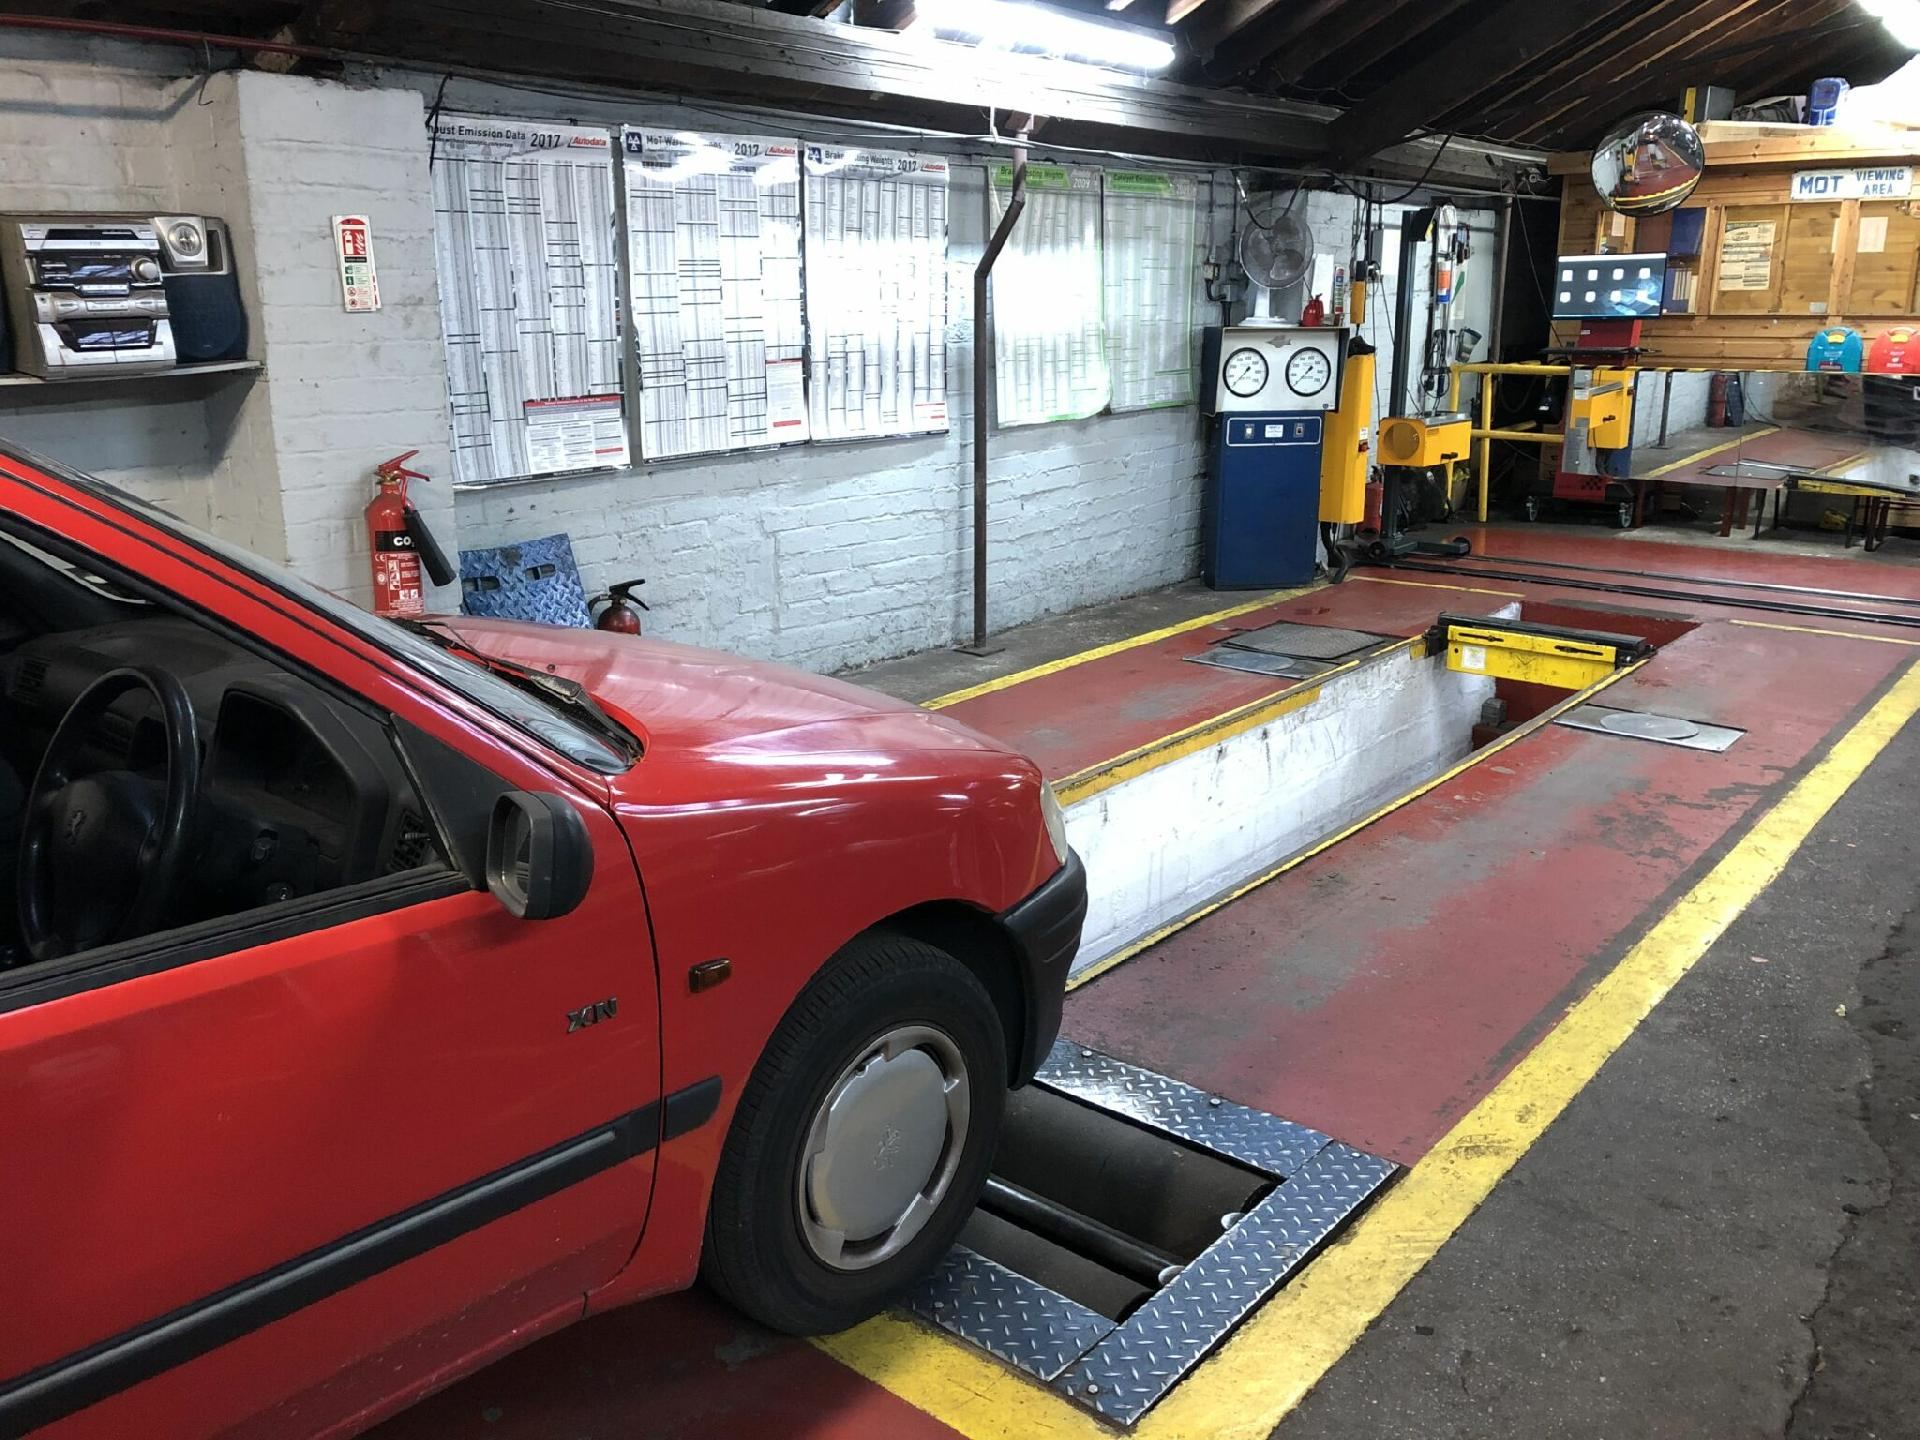 MOT fraud, a risk to road safety